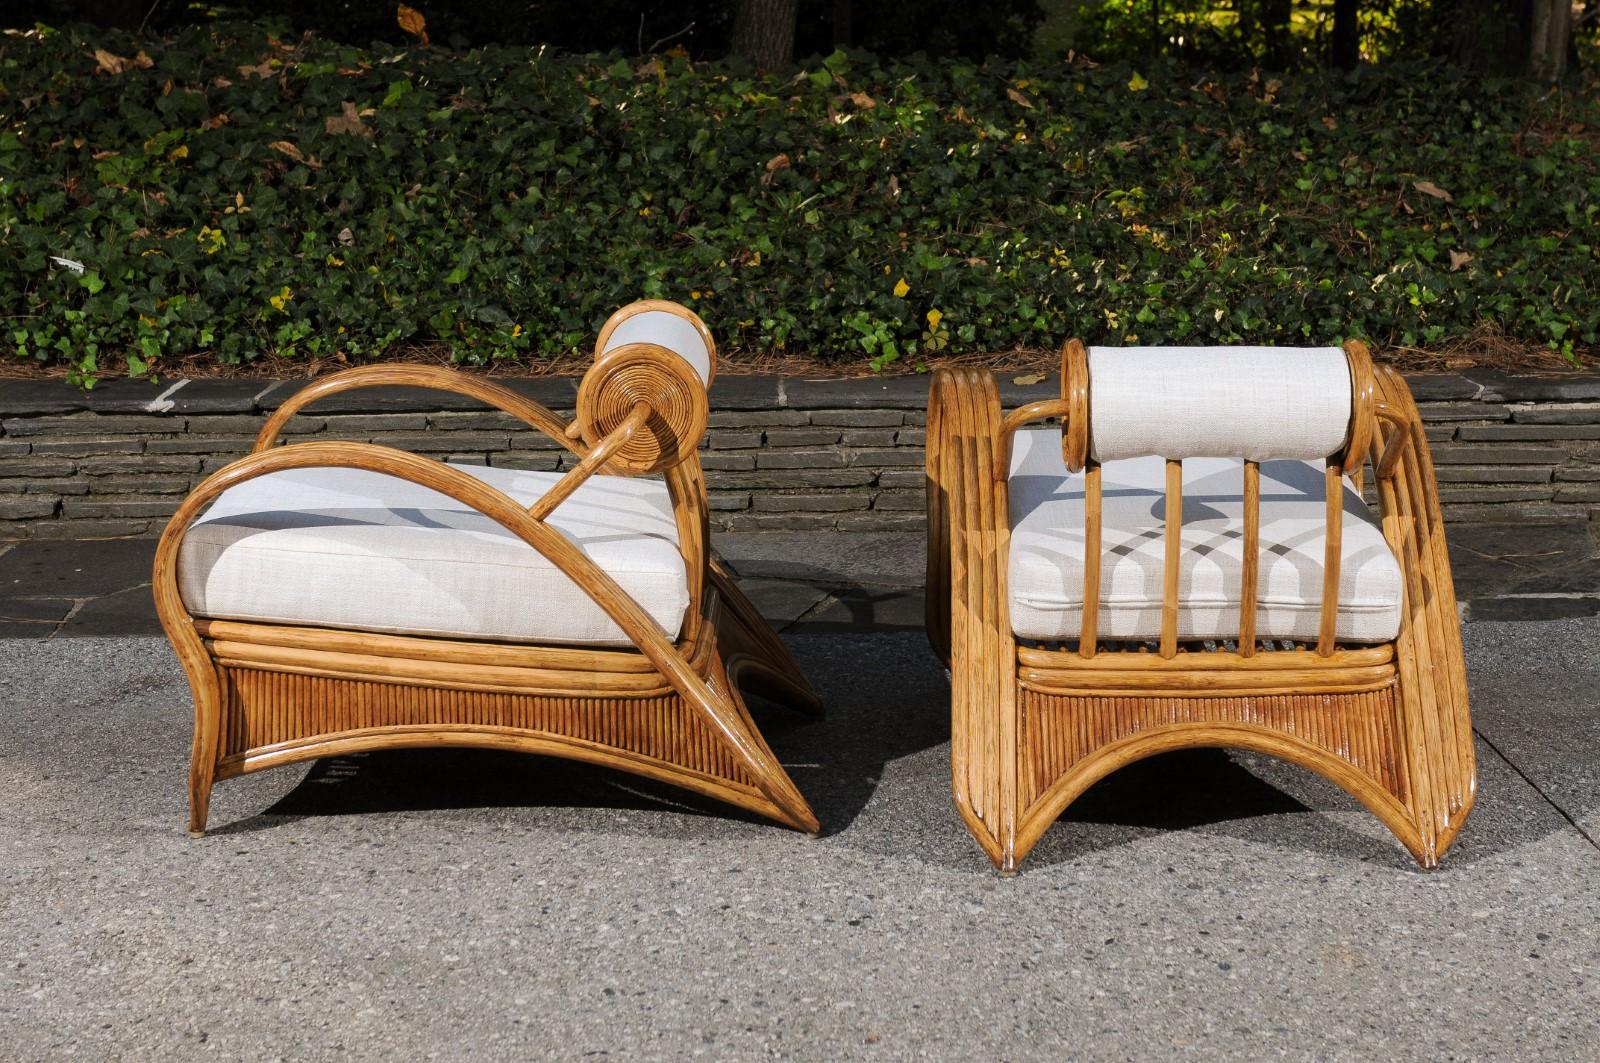 Late 20th Century Extraordinary Pair of Art Deco Style Loungers by Betty Cobonpue, circa 1980 For Sale